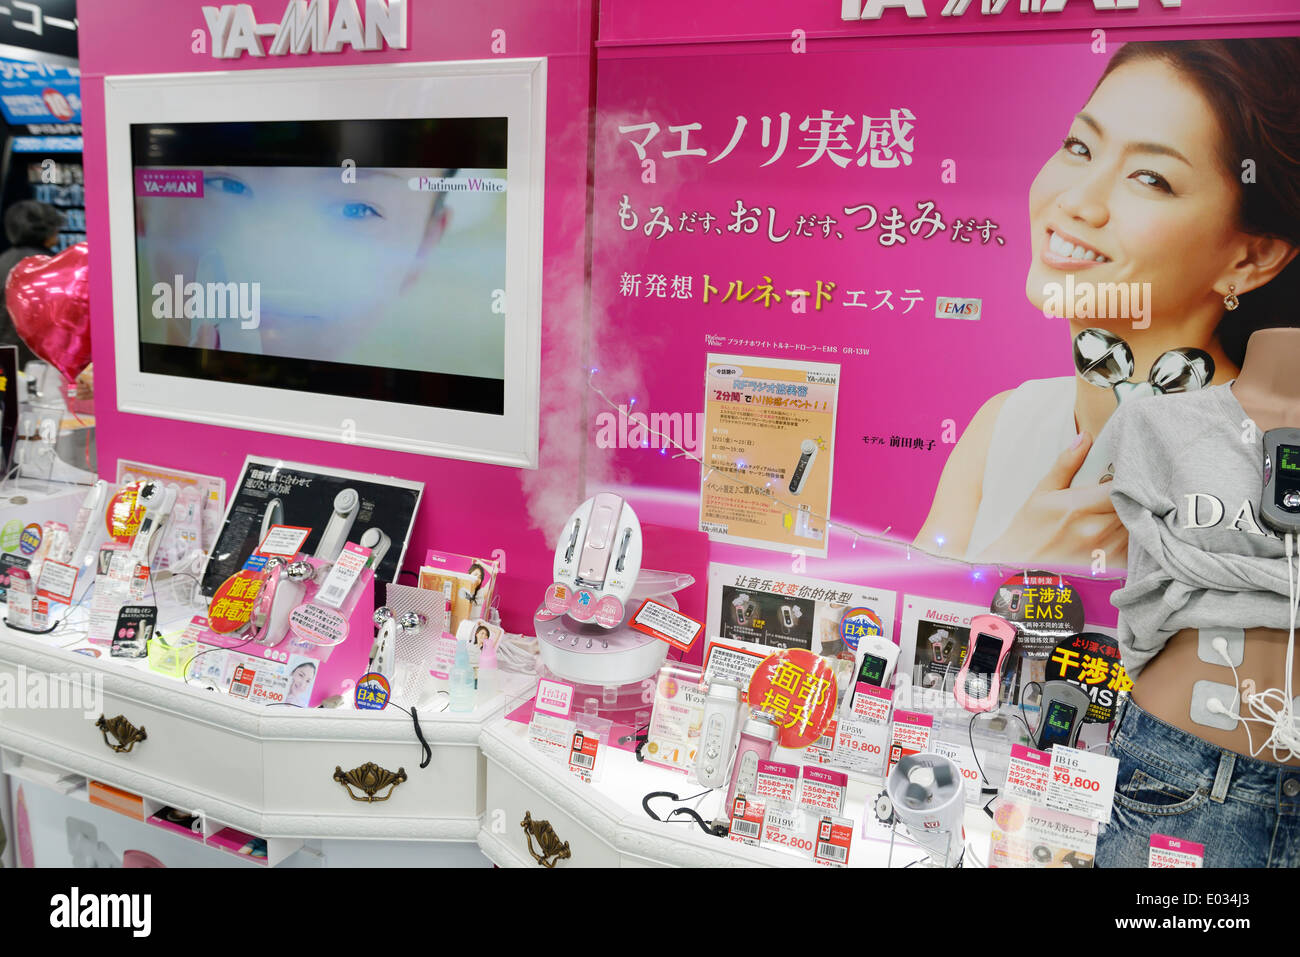 Ya-Man beauty treatment electronic products on store display in Tokyo, Japan. Stock Photo